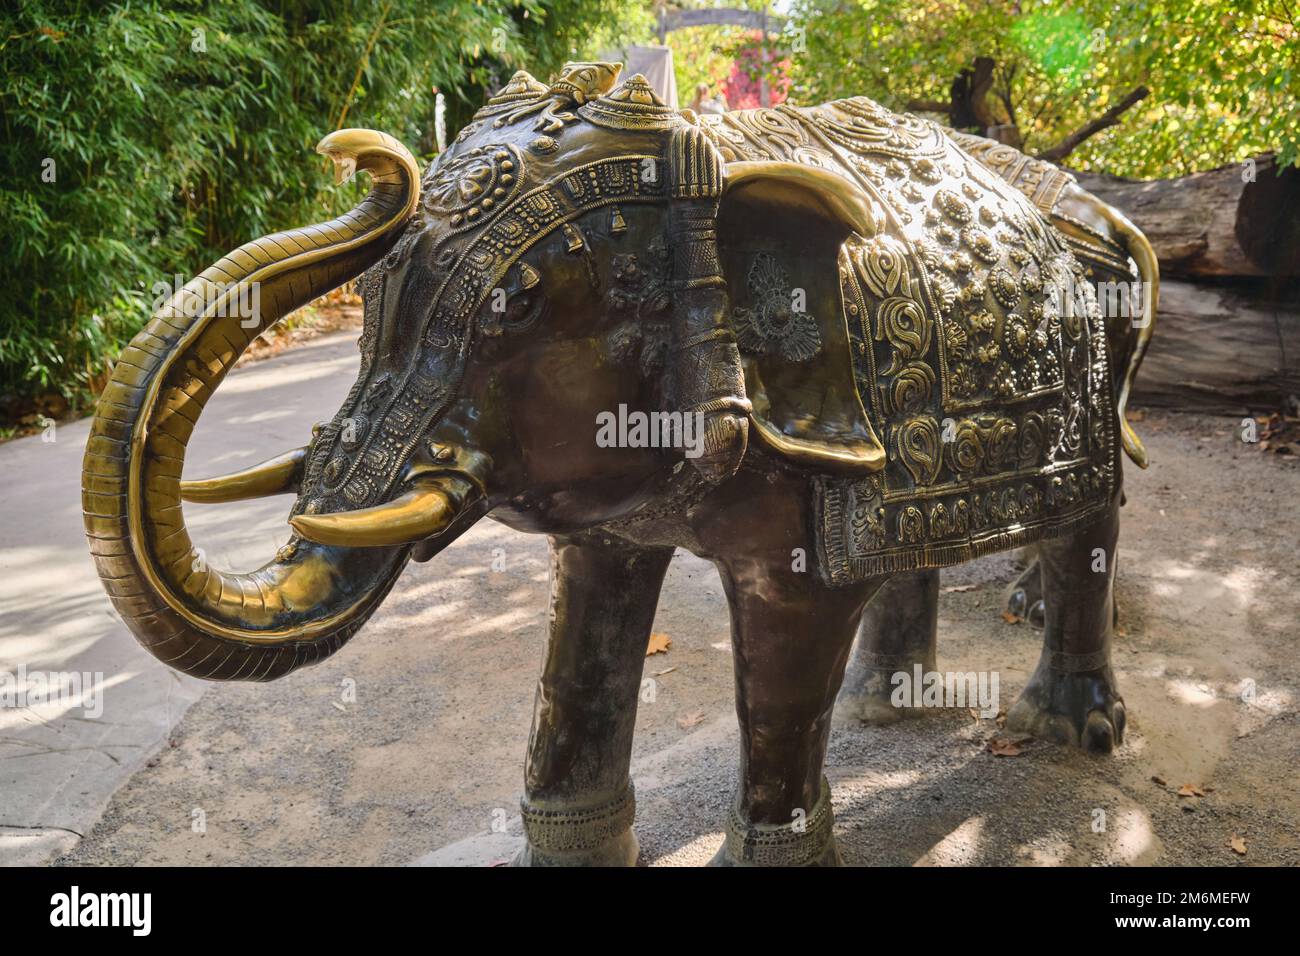 Ancient golden statue of an Indian elephant in city park outdoor no people Stock Photo